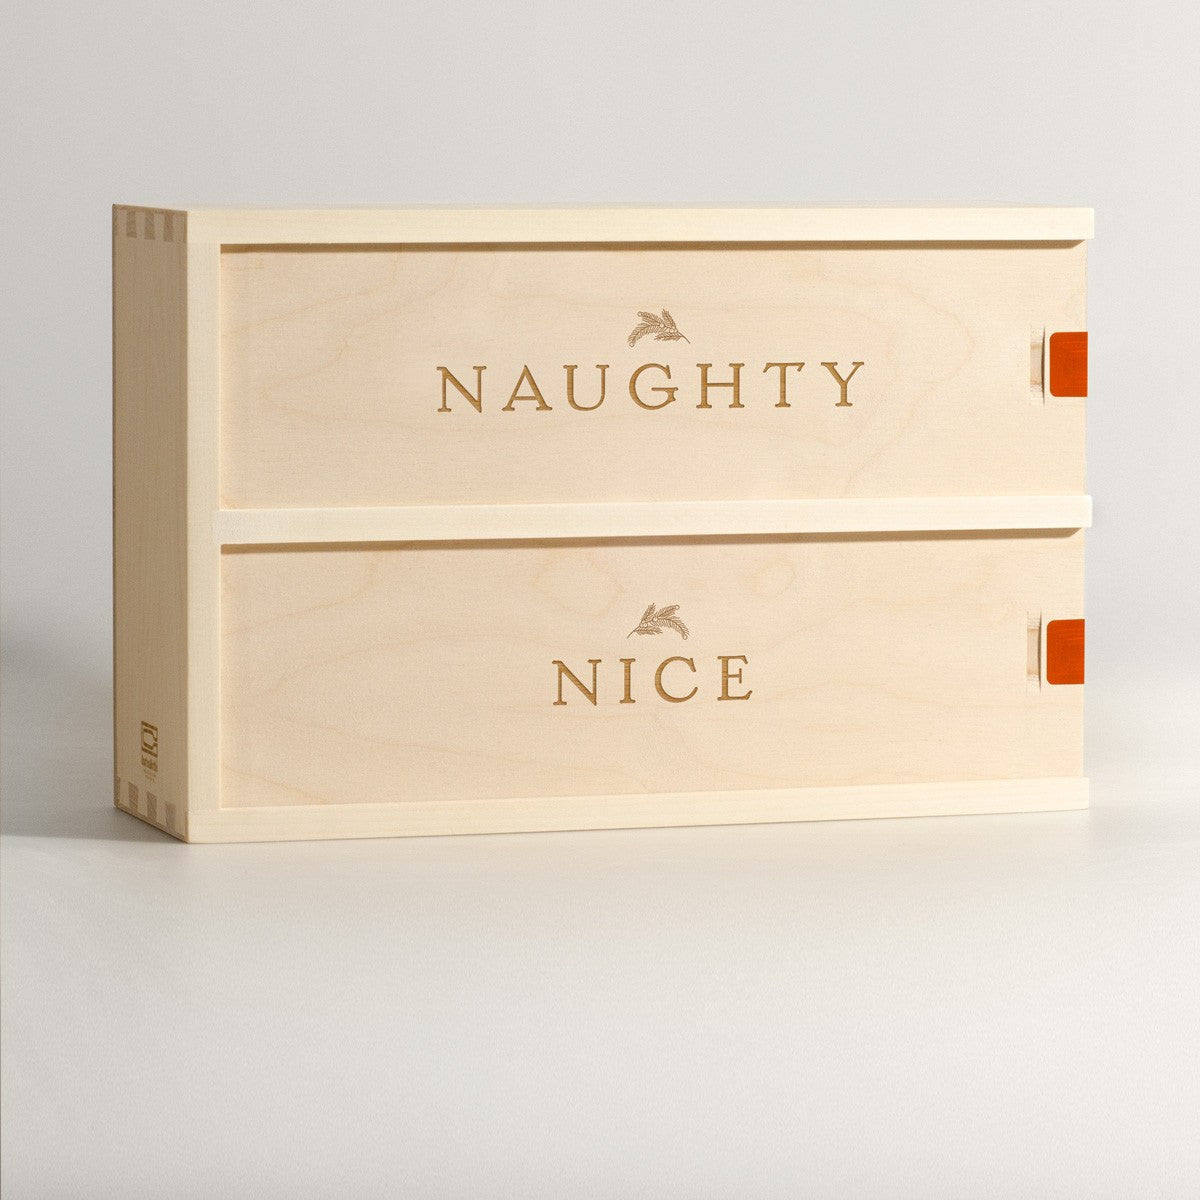 The naughty and nice gift card list for last-minute Christmas presents